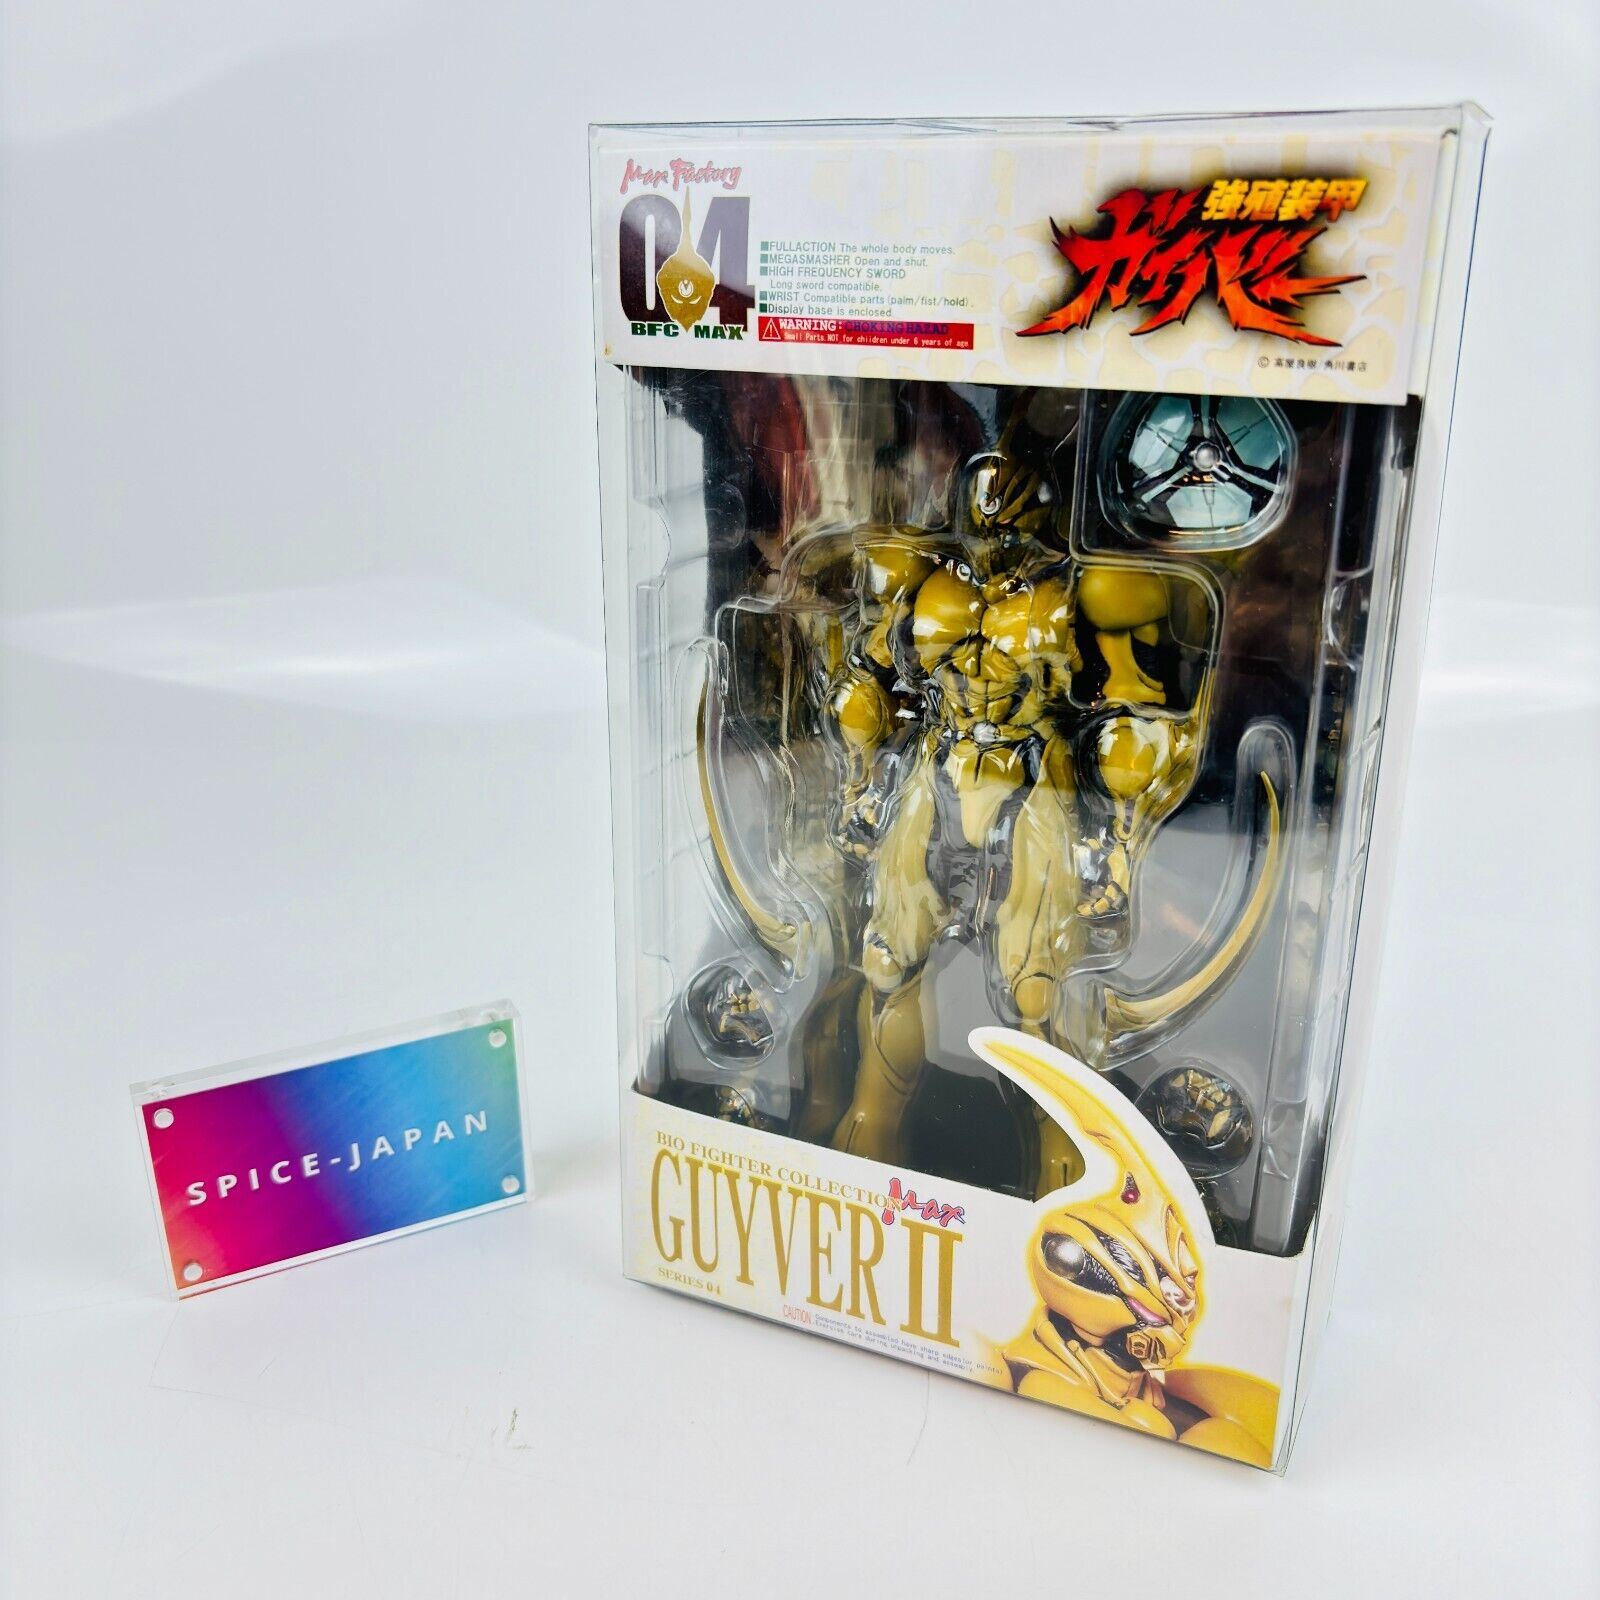 Guyver The Bioboosted Armor Guyver II Action Figure Max Factory w/box Japan